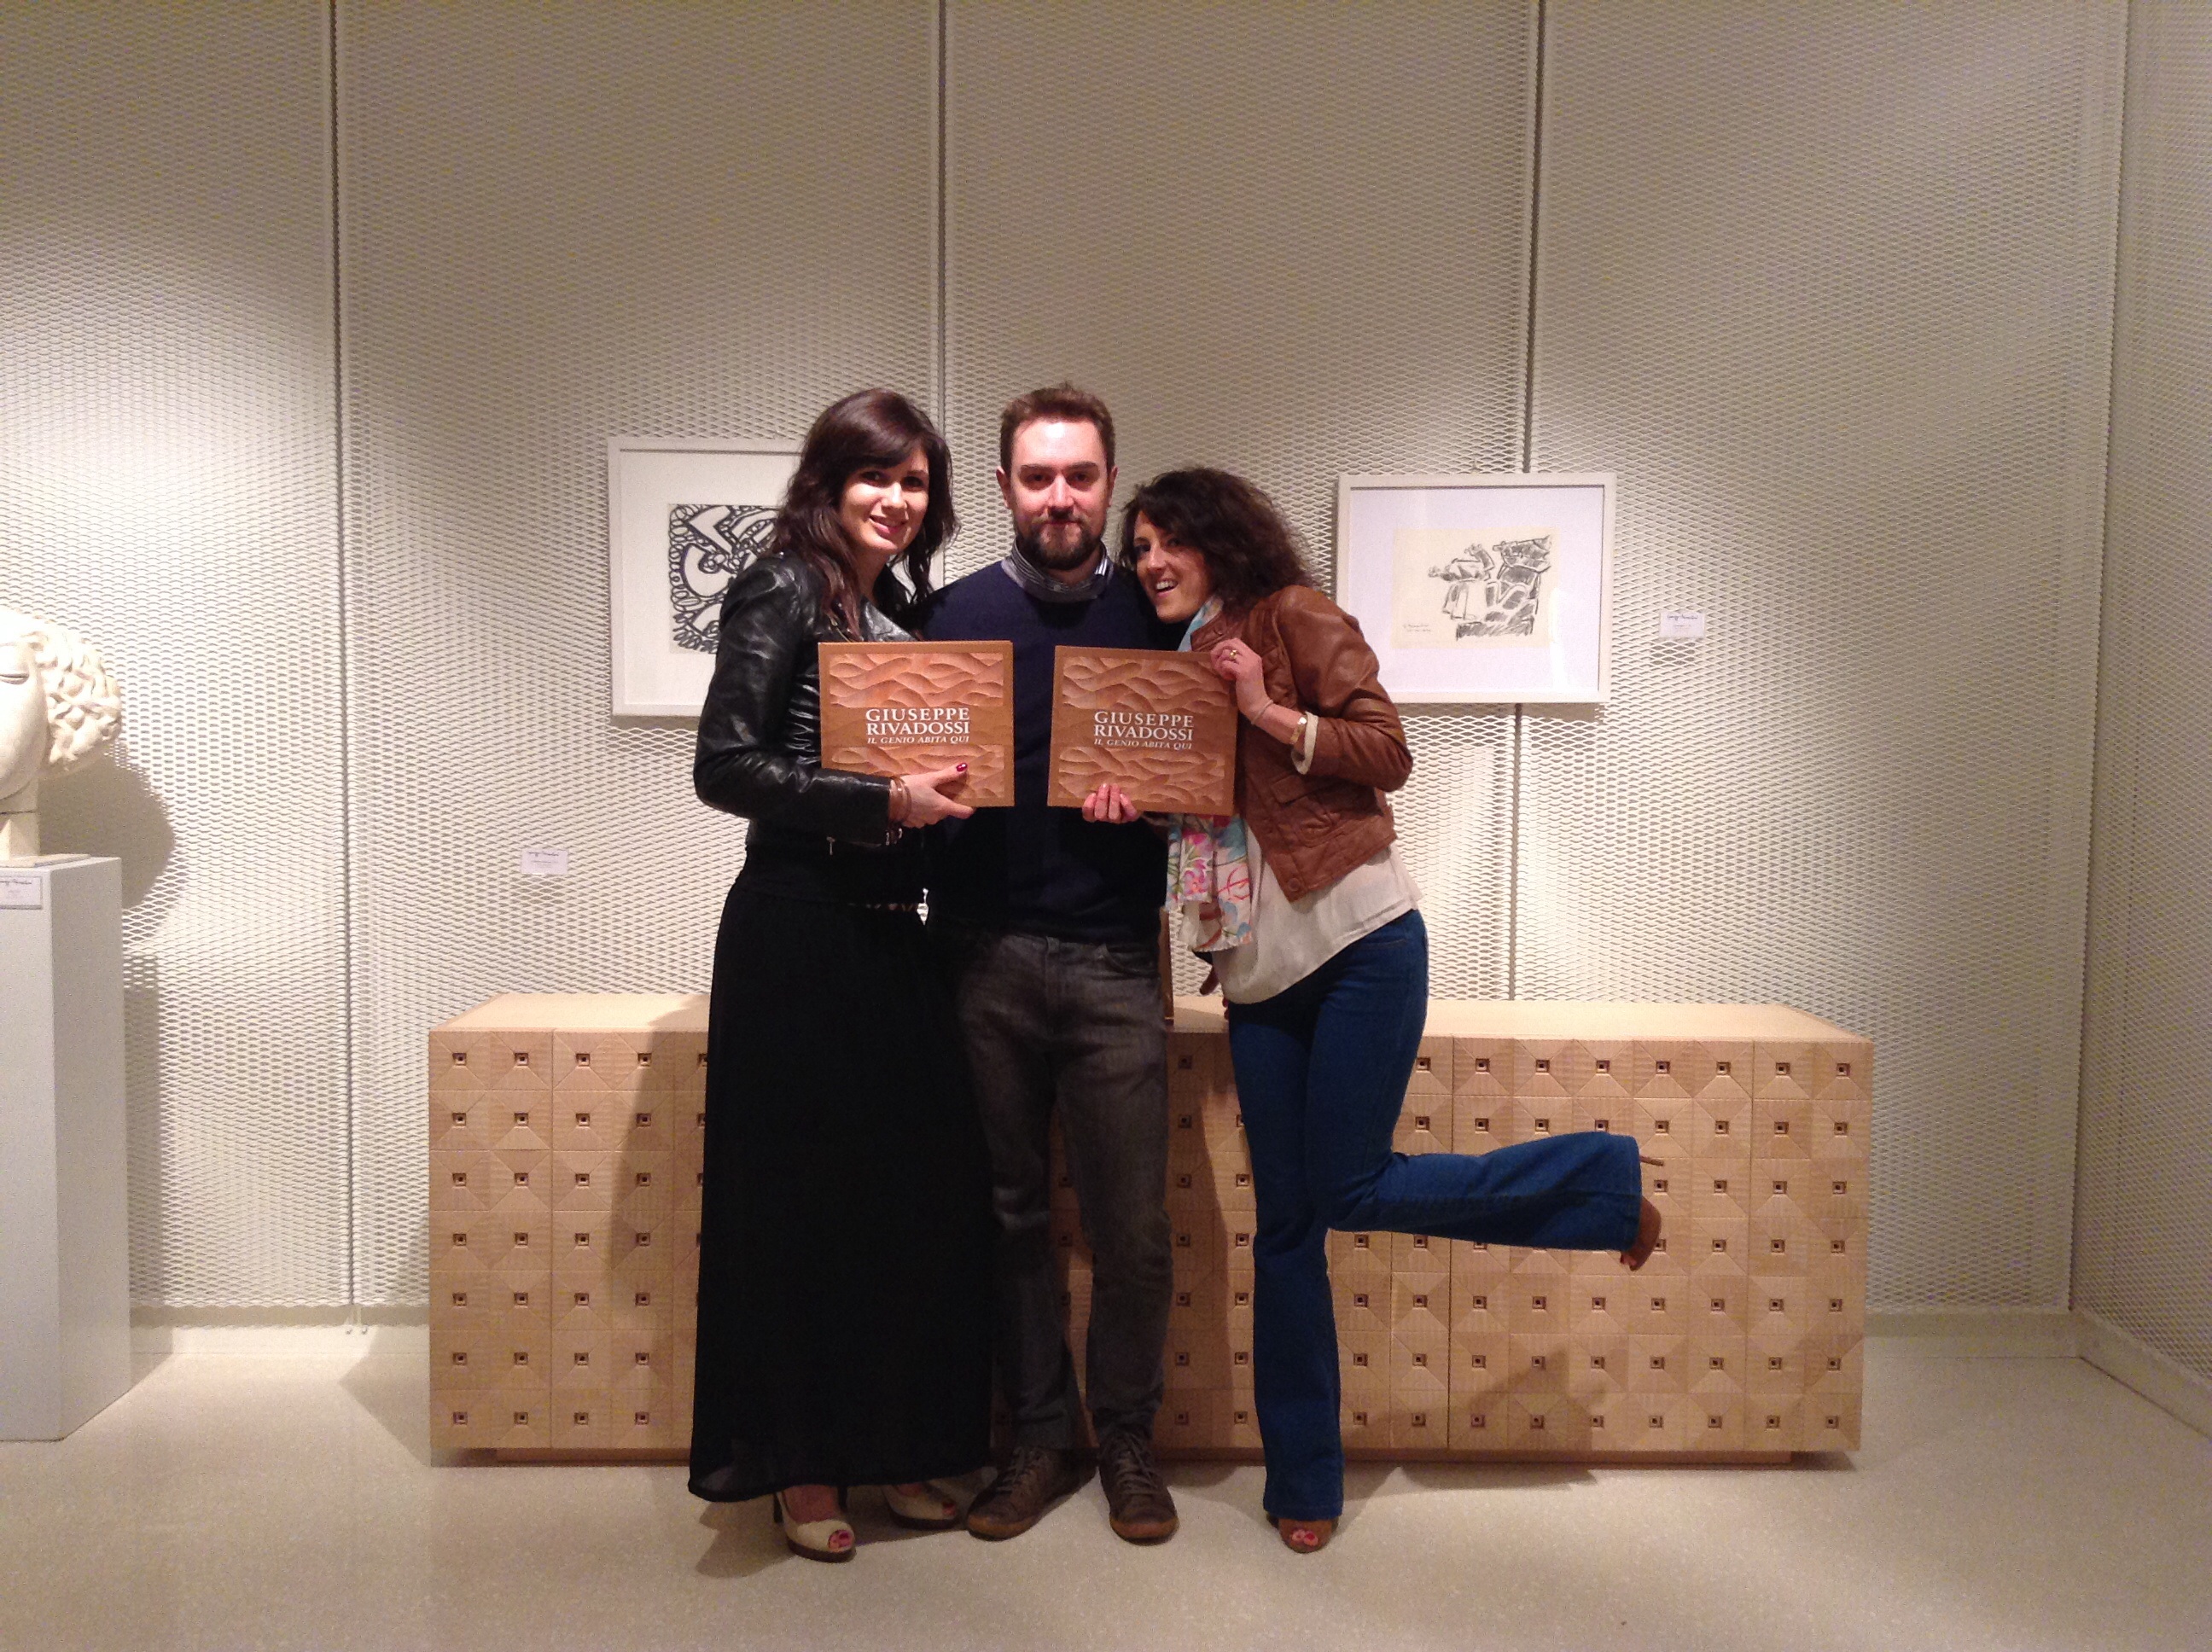 Fans posed with our catalogue and Mossaic Dresser